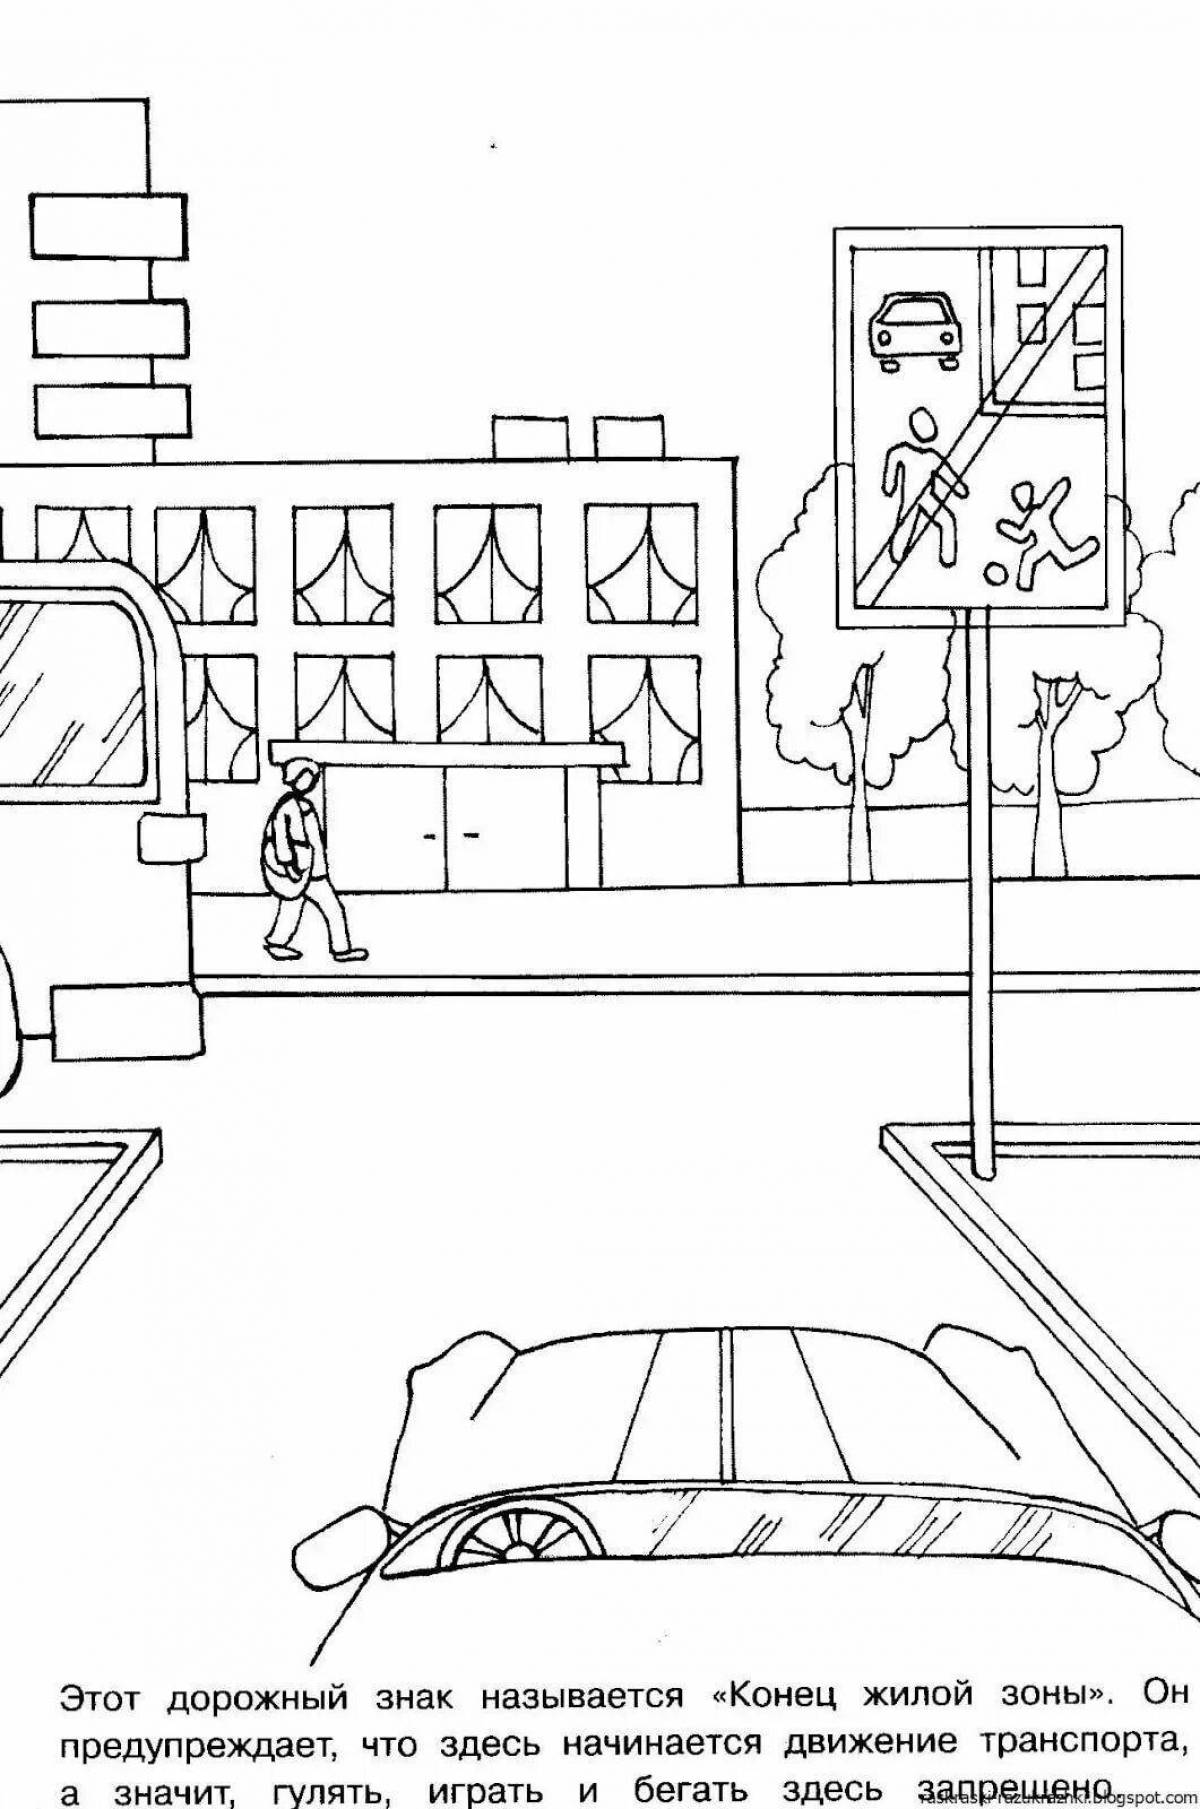 Nice traffic safety coloring page for students